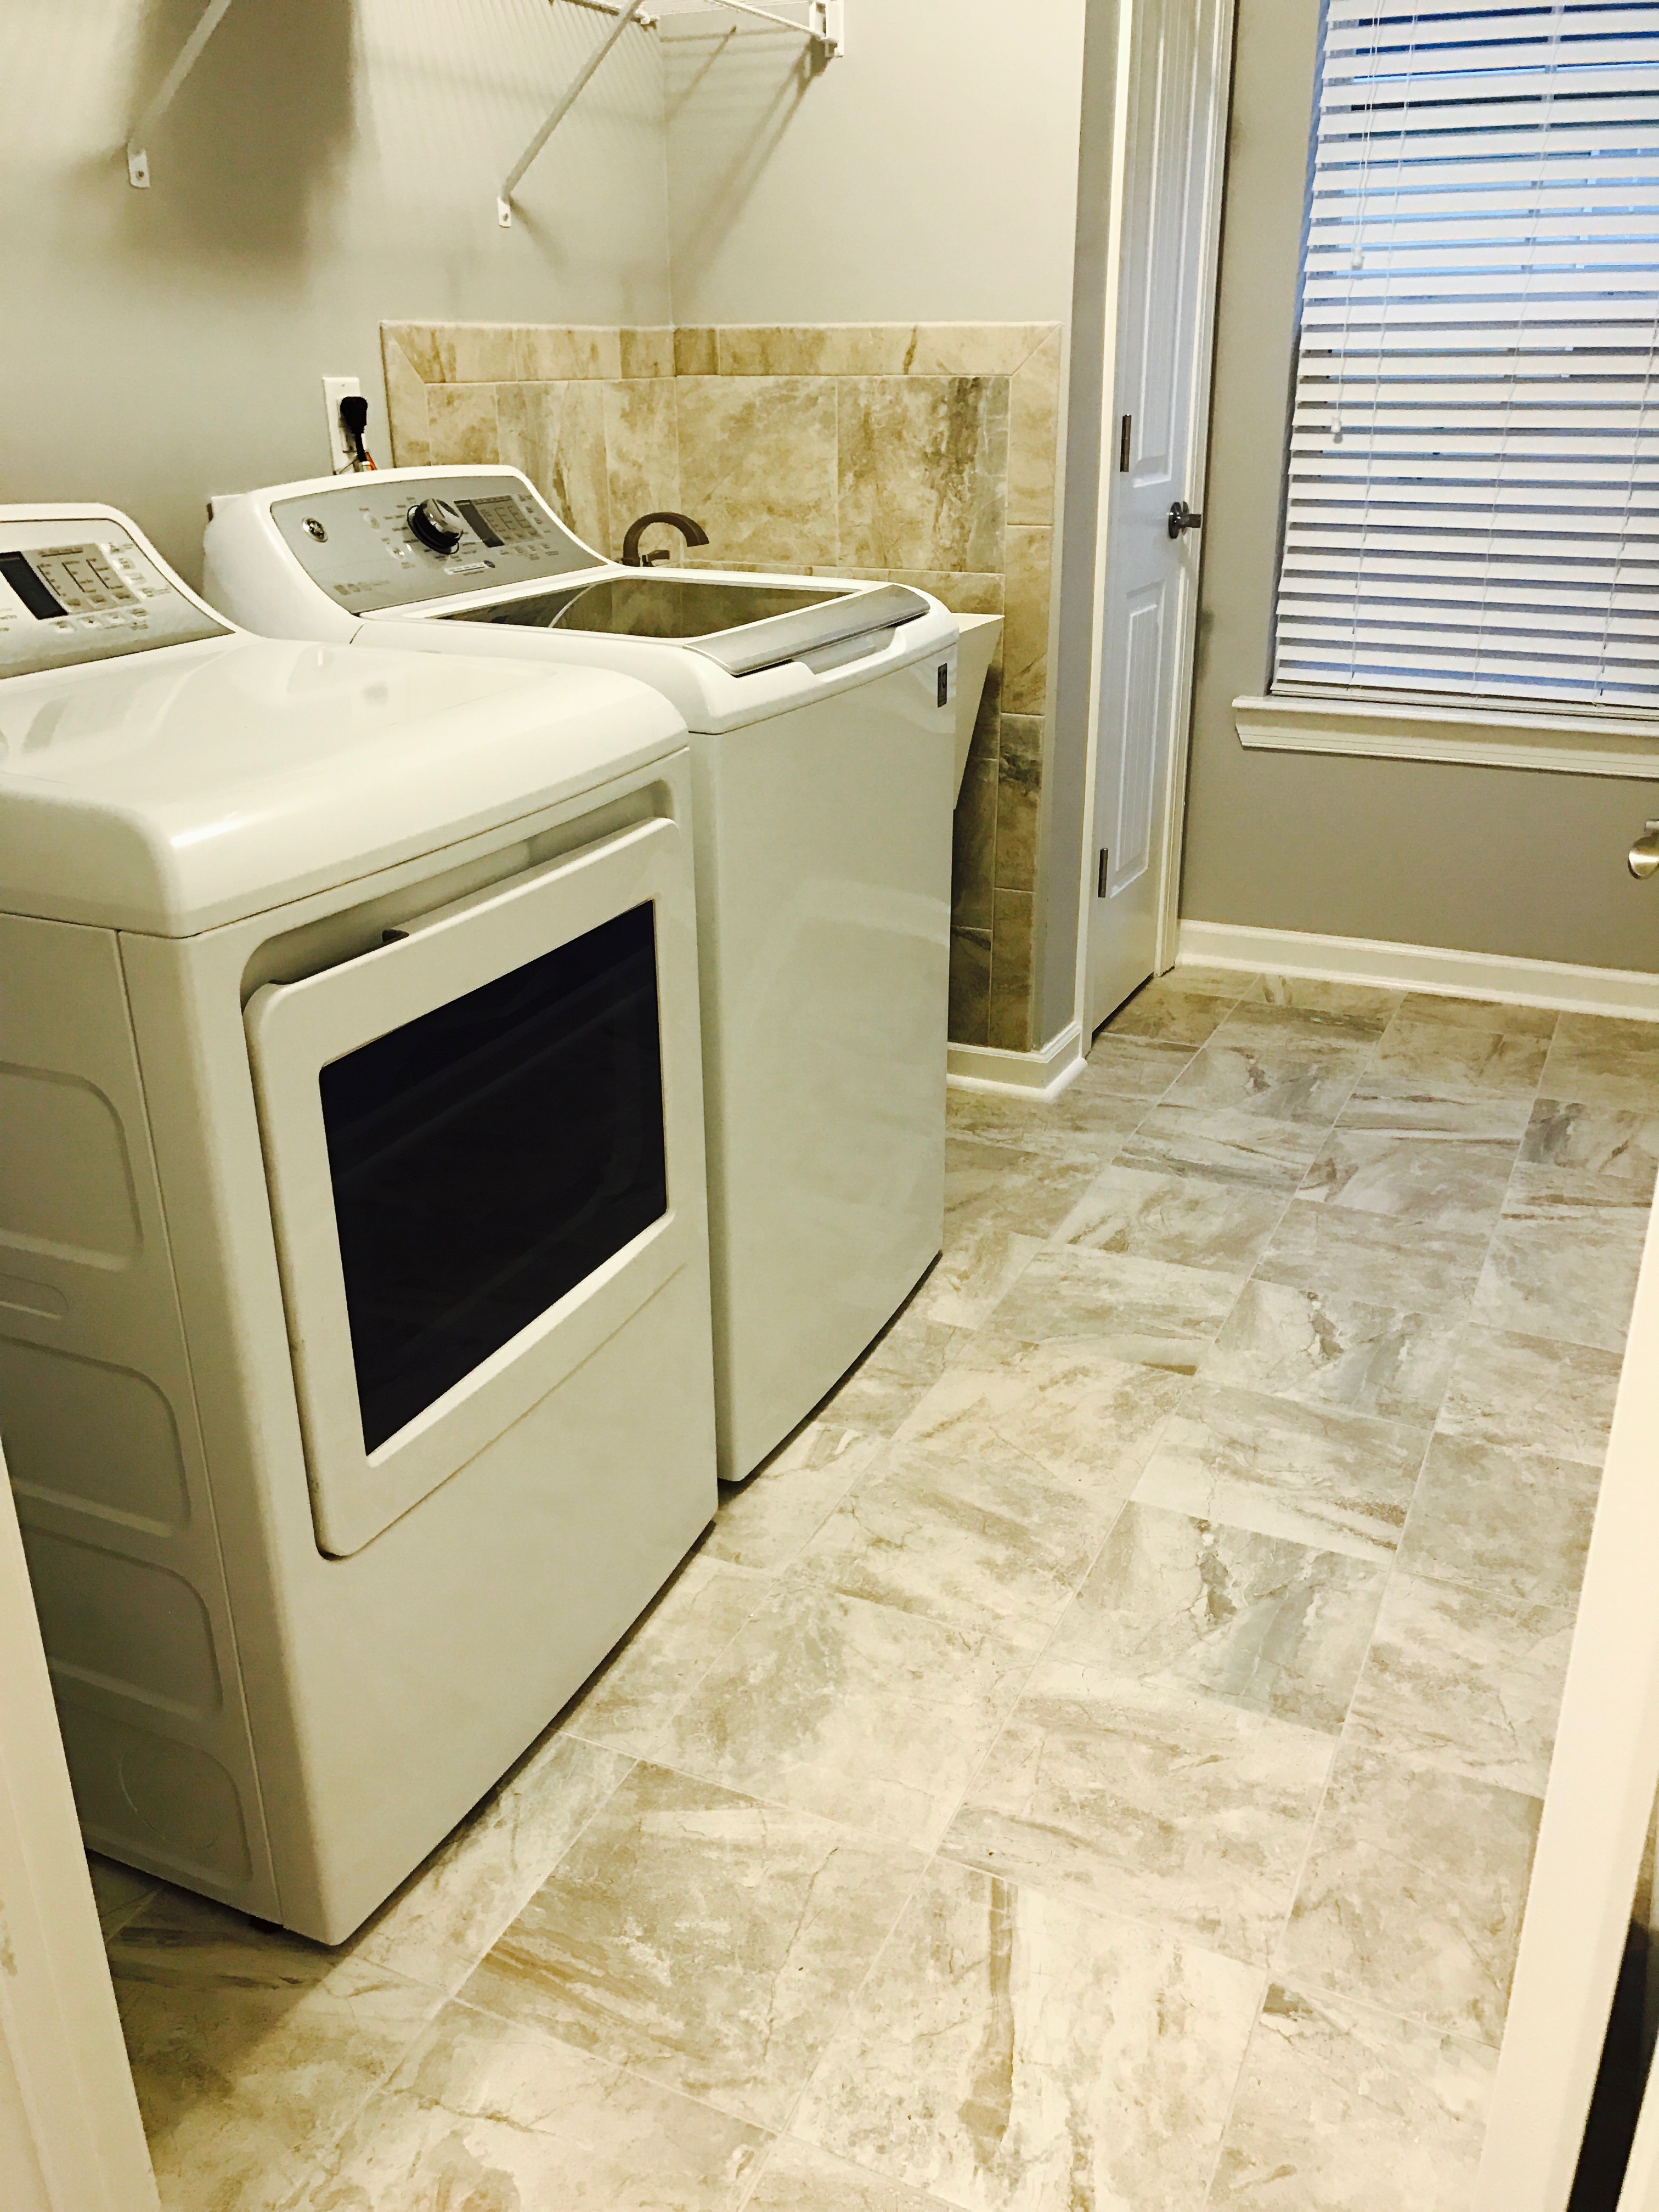 tiled laundry room general contractor blount's complete home services fire water restoration termite pest control augusta ga